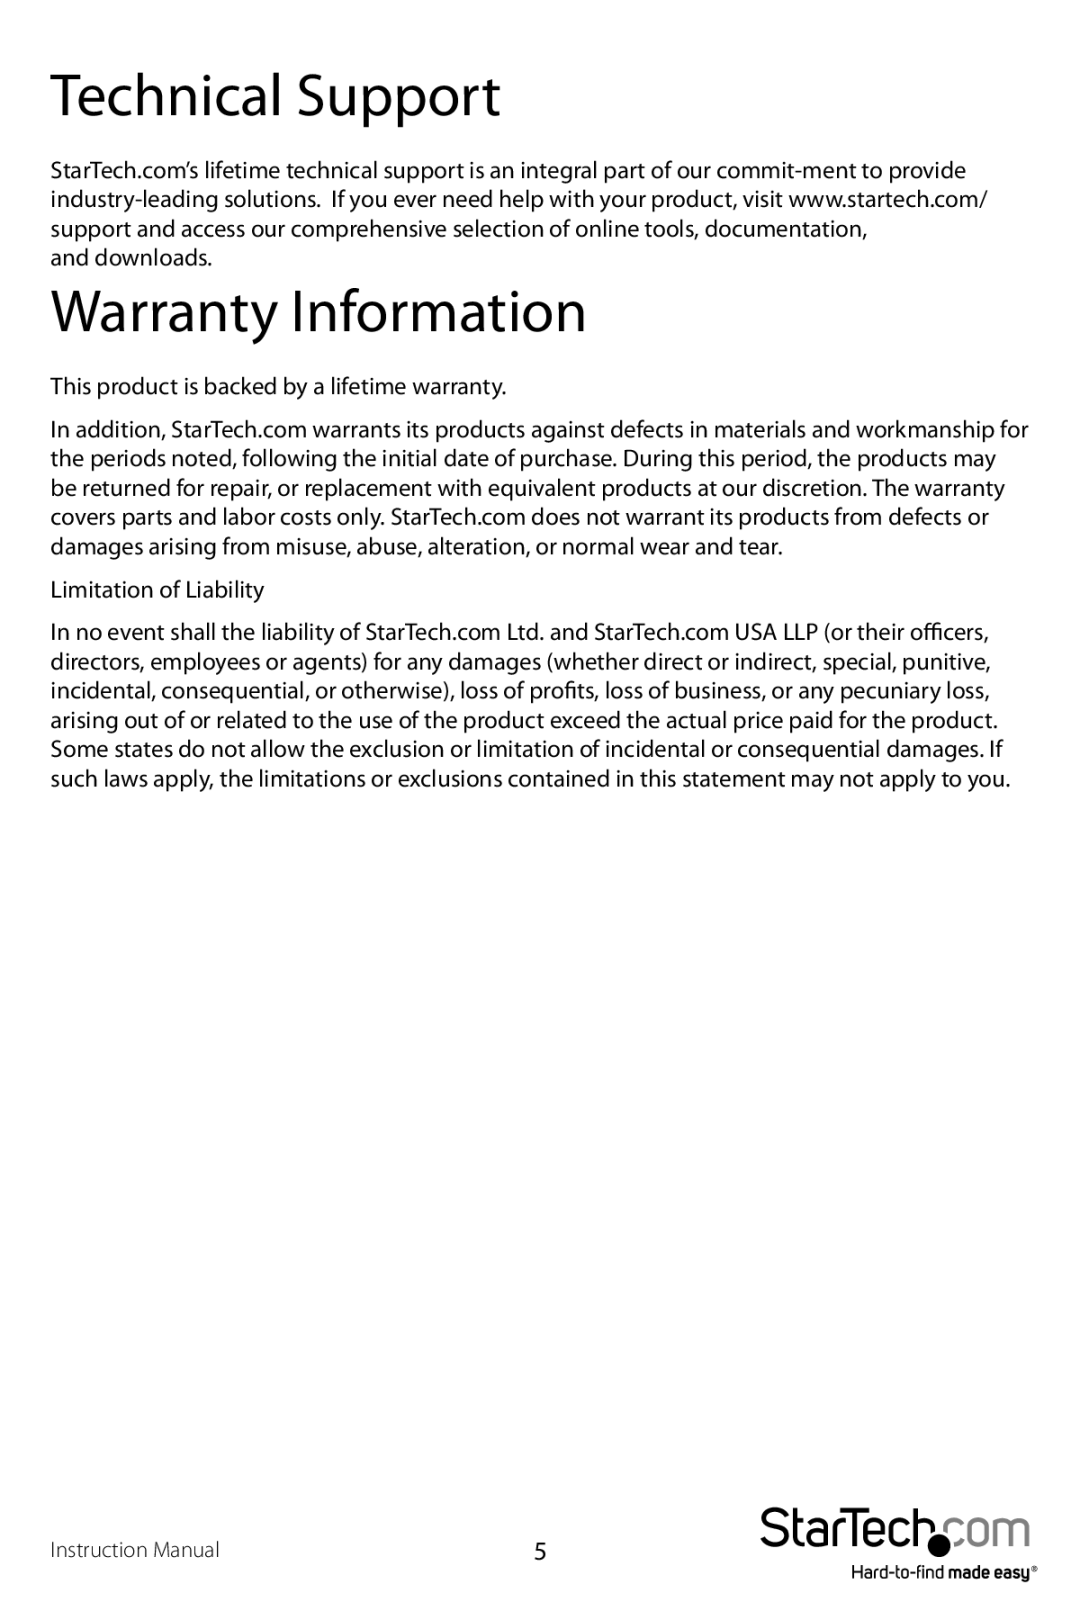 StarTech.com PEX2S950 manual Technical Support, Warranty Information, and downloads, Limitation of Liability 